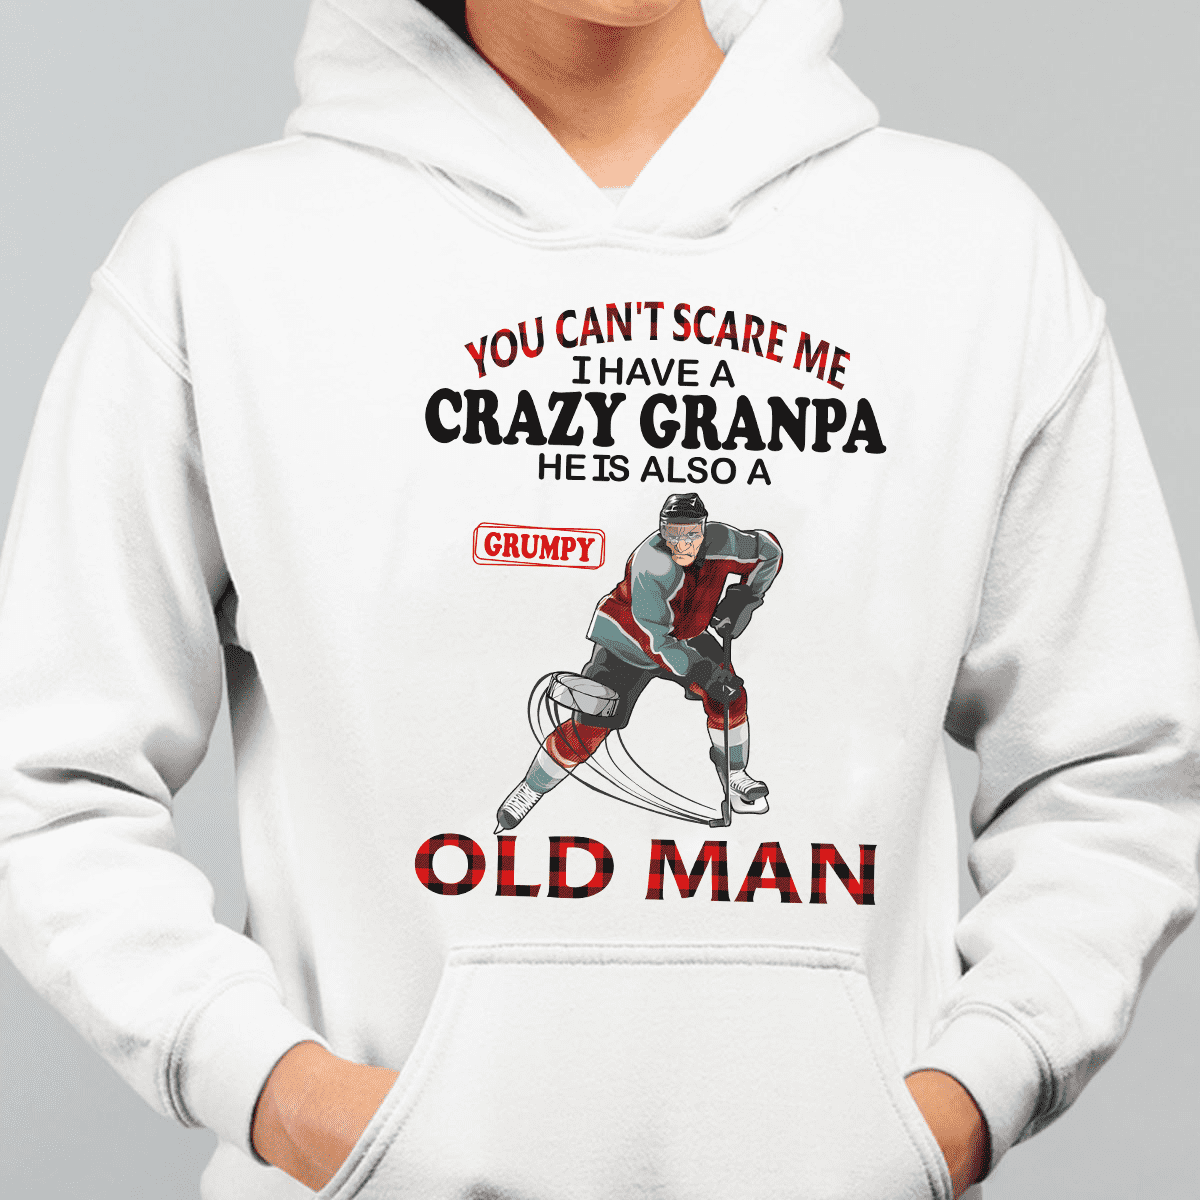 You can't scare me I have a crazy grandpa he is also a grumpy old man - Grandpa playing hockey